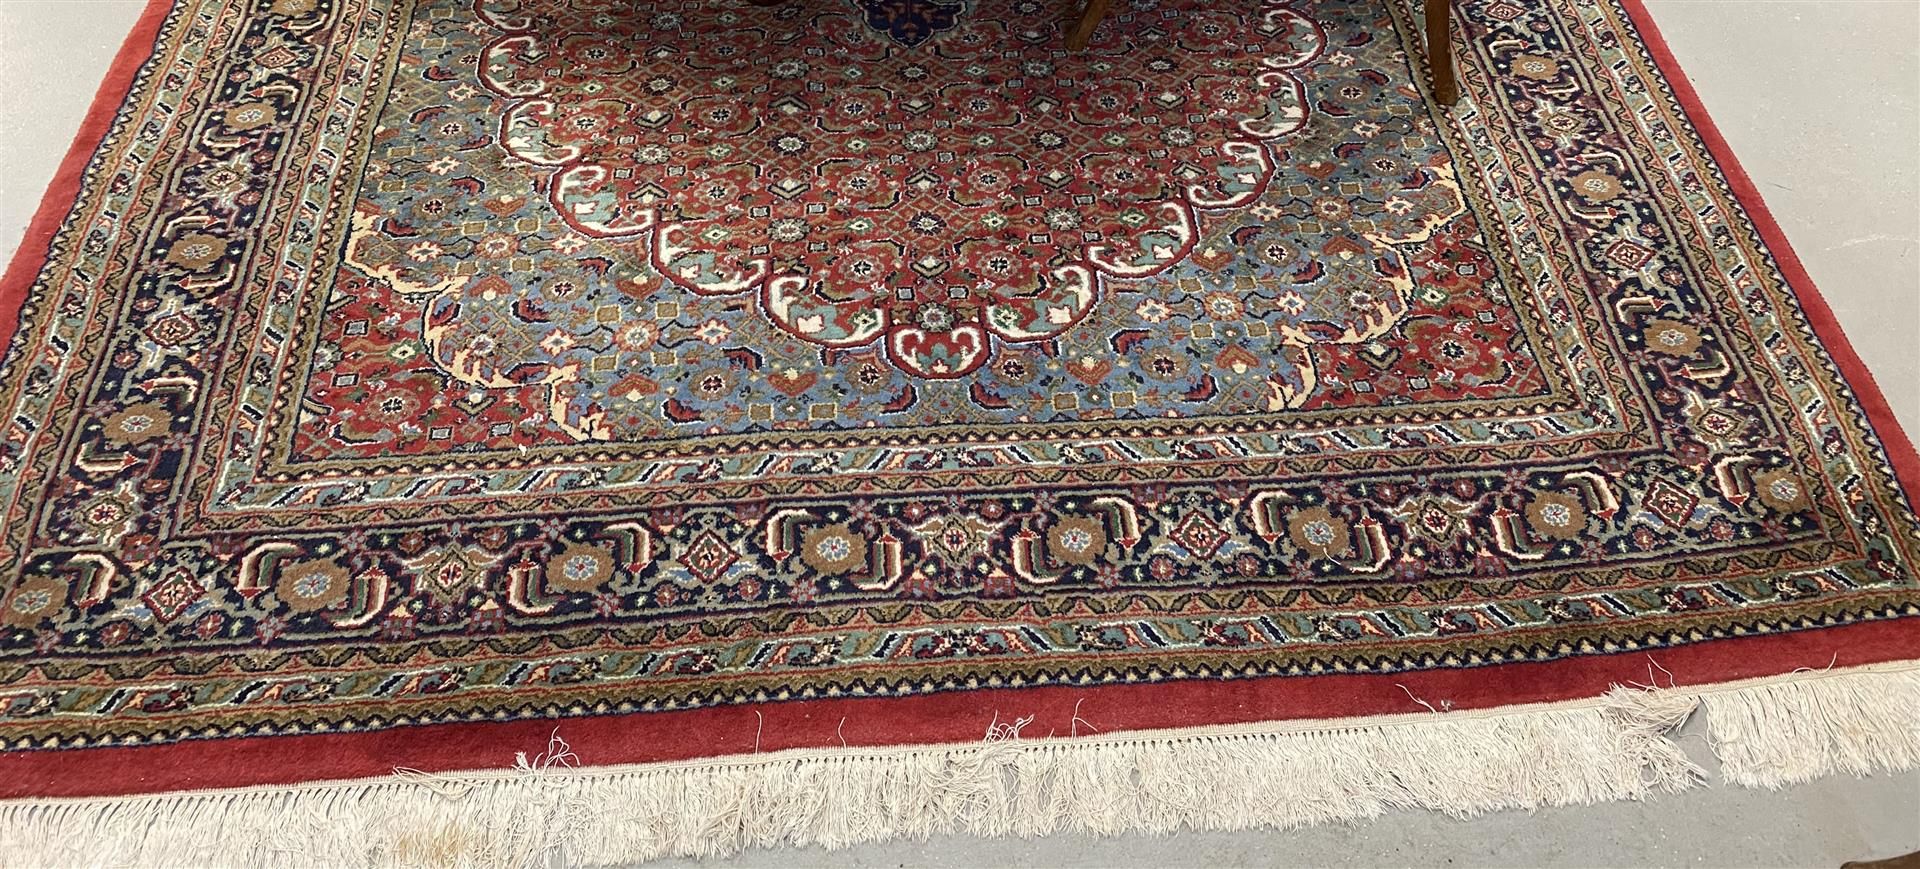 An Oriental wool carpet with round ground and floral motifs.